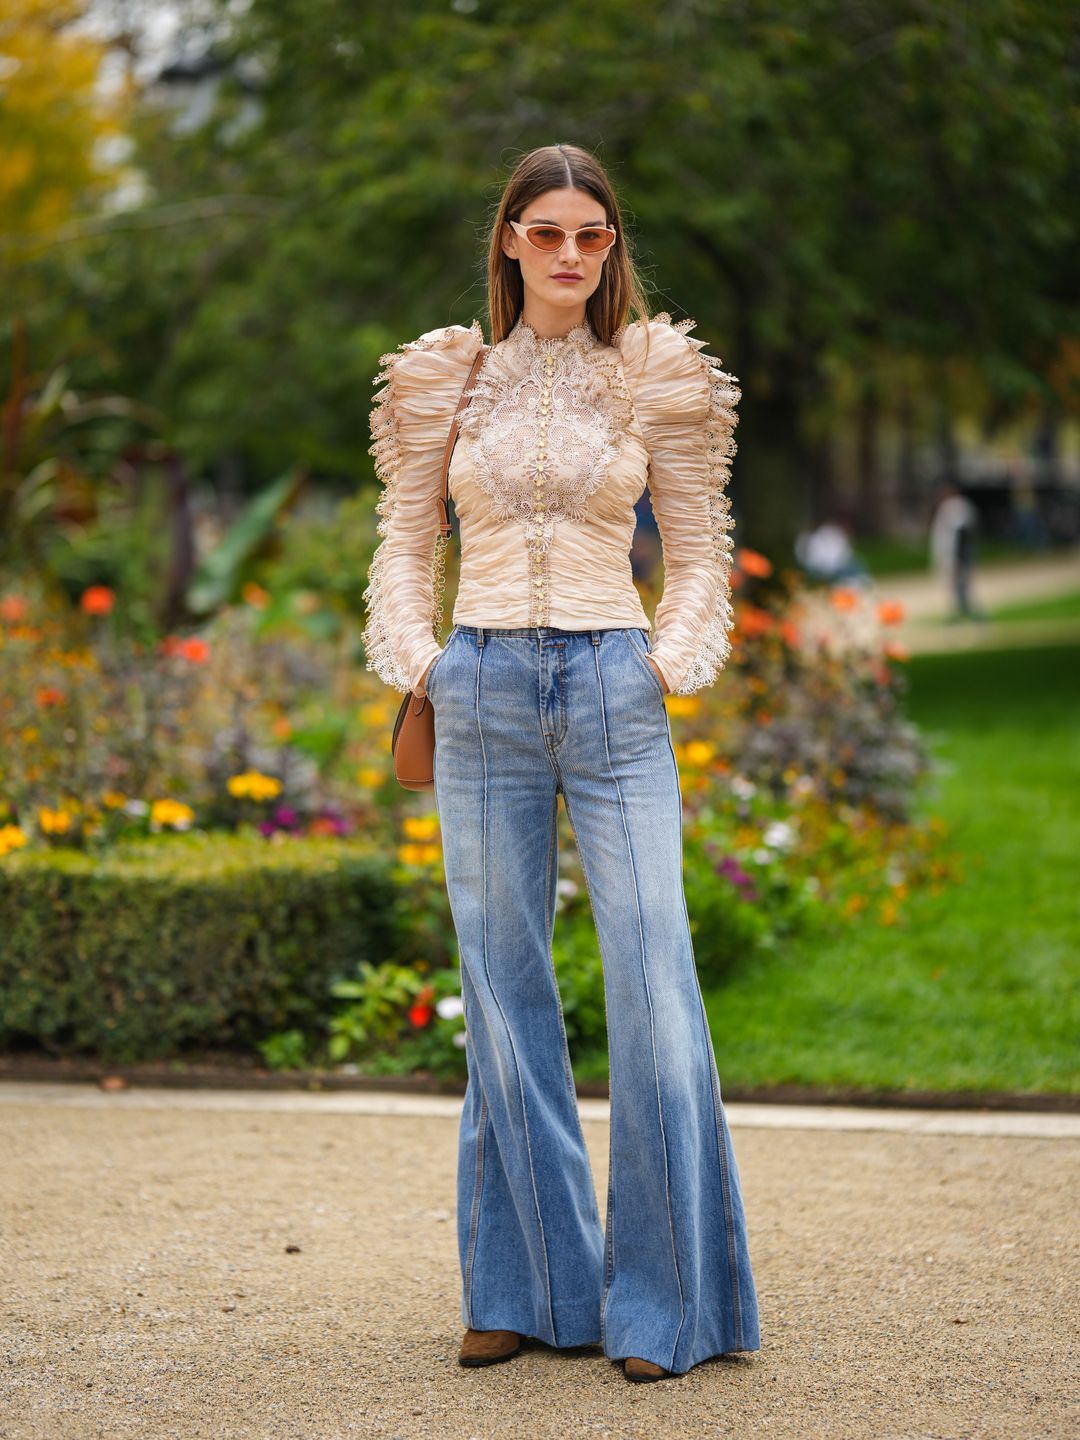 Ophelie Guillermand wearing flares with a lace-trimmed blouse 